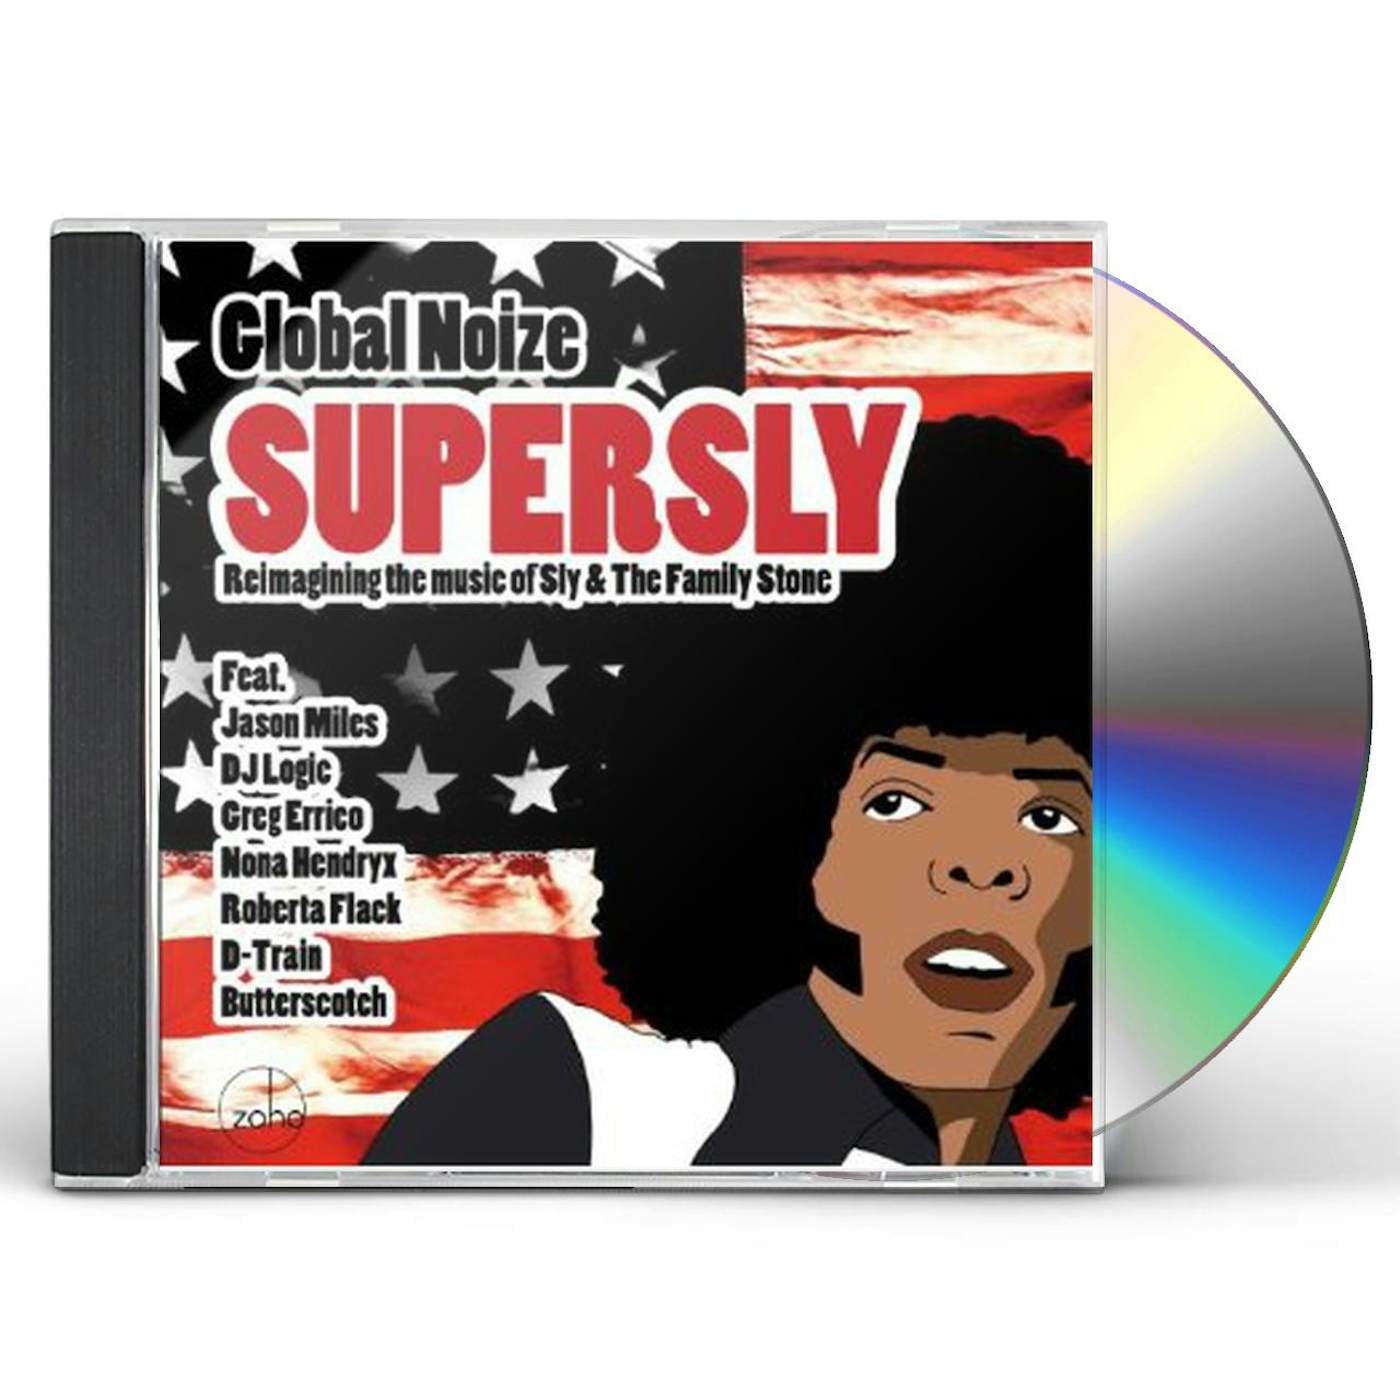 Global Noize SUPERSLY:REIMAGINING THE MUSIC OF SLY & THE FAMILY CD